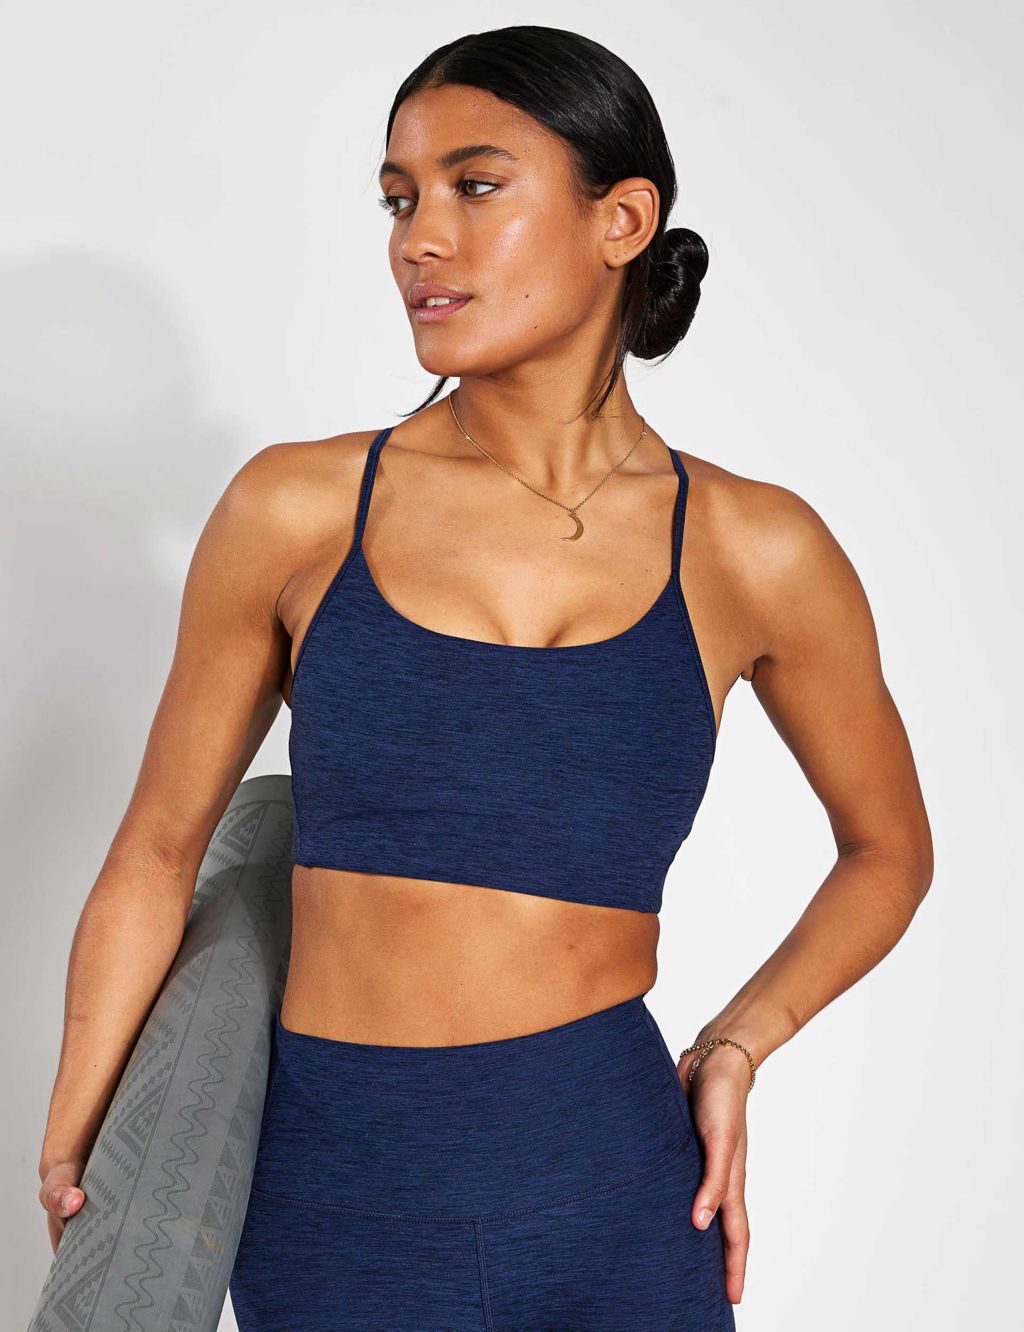 SoftLuxe Non Wired Sports Bra image 1